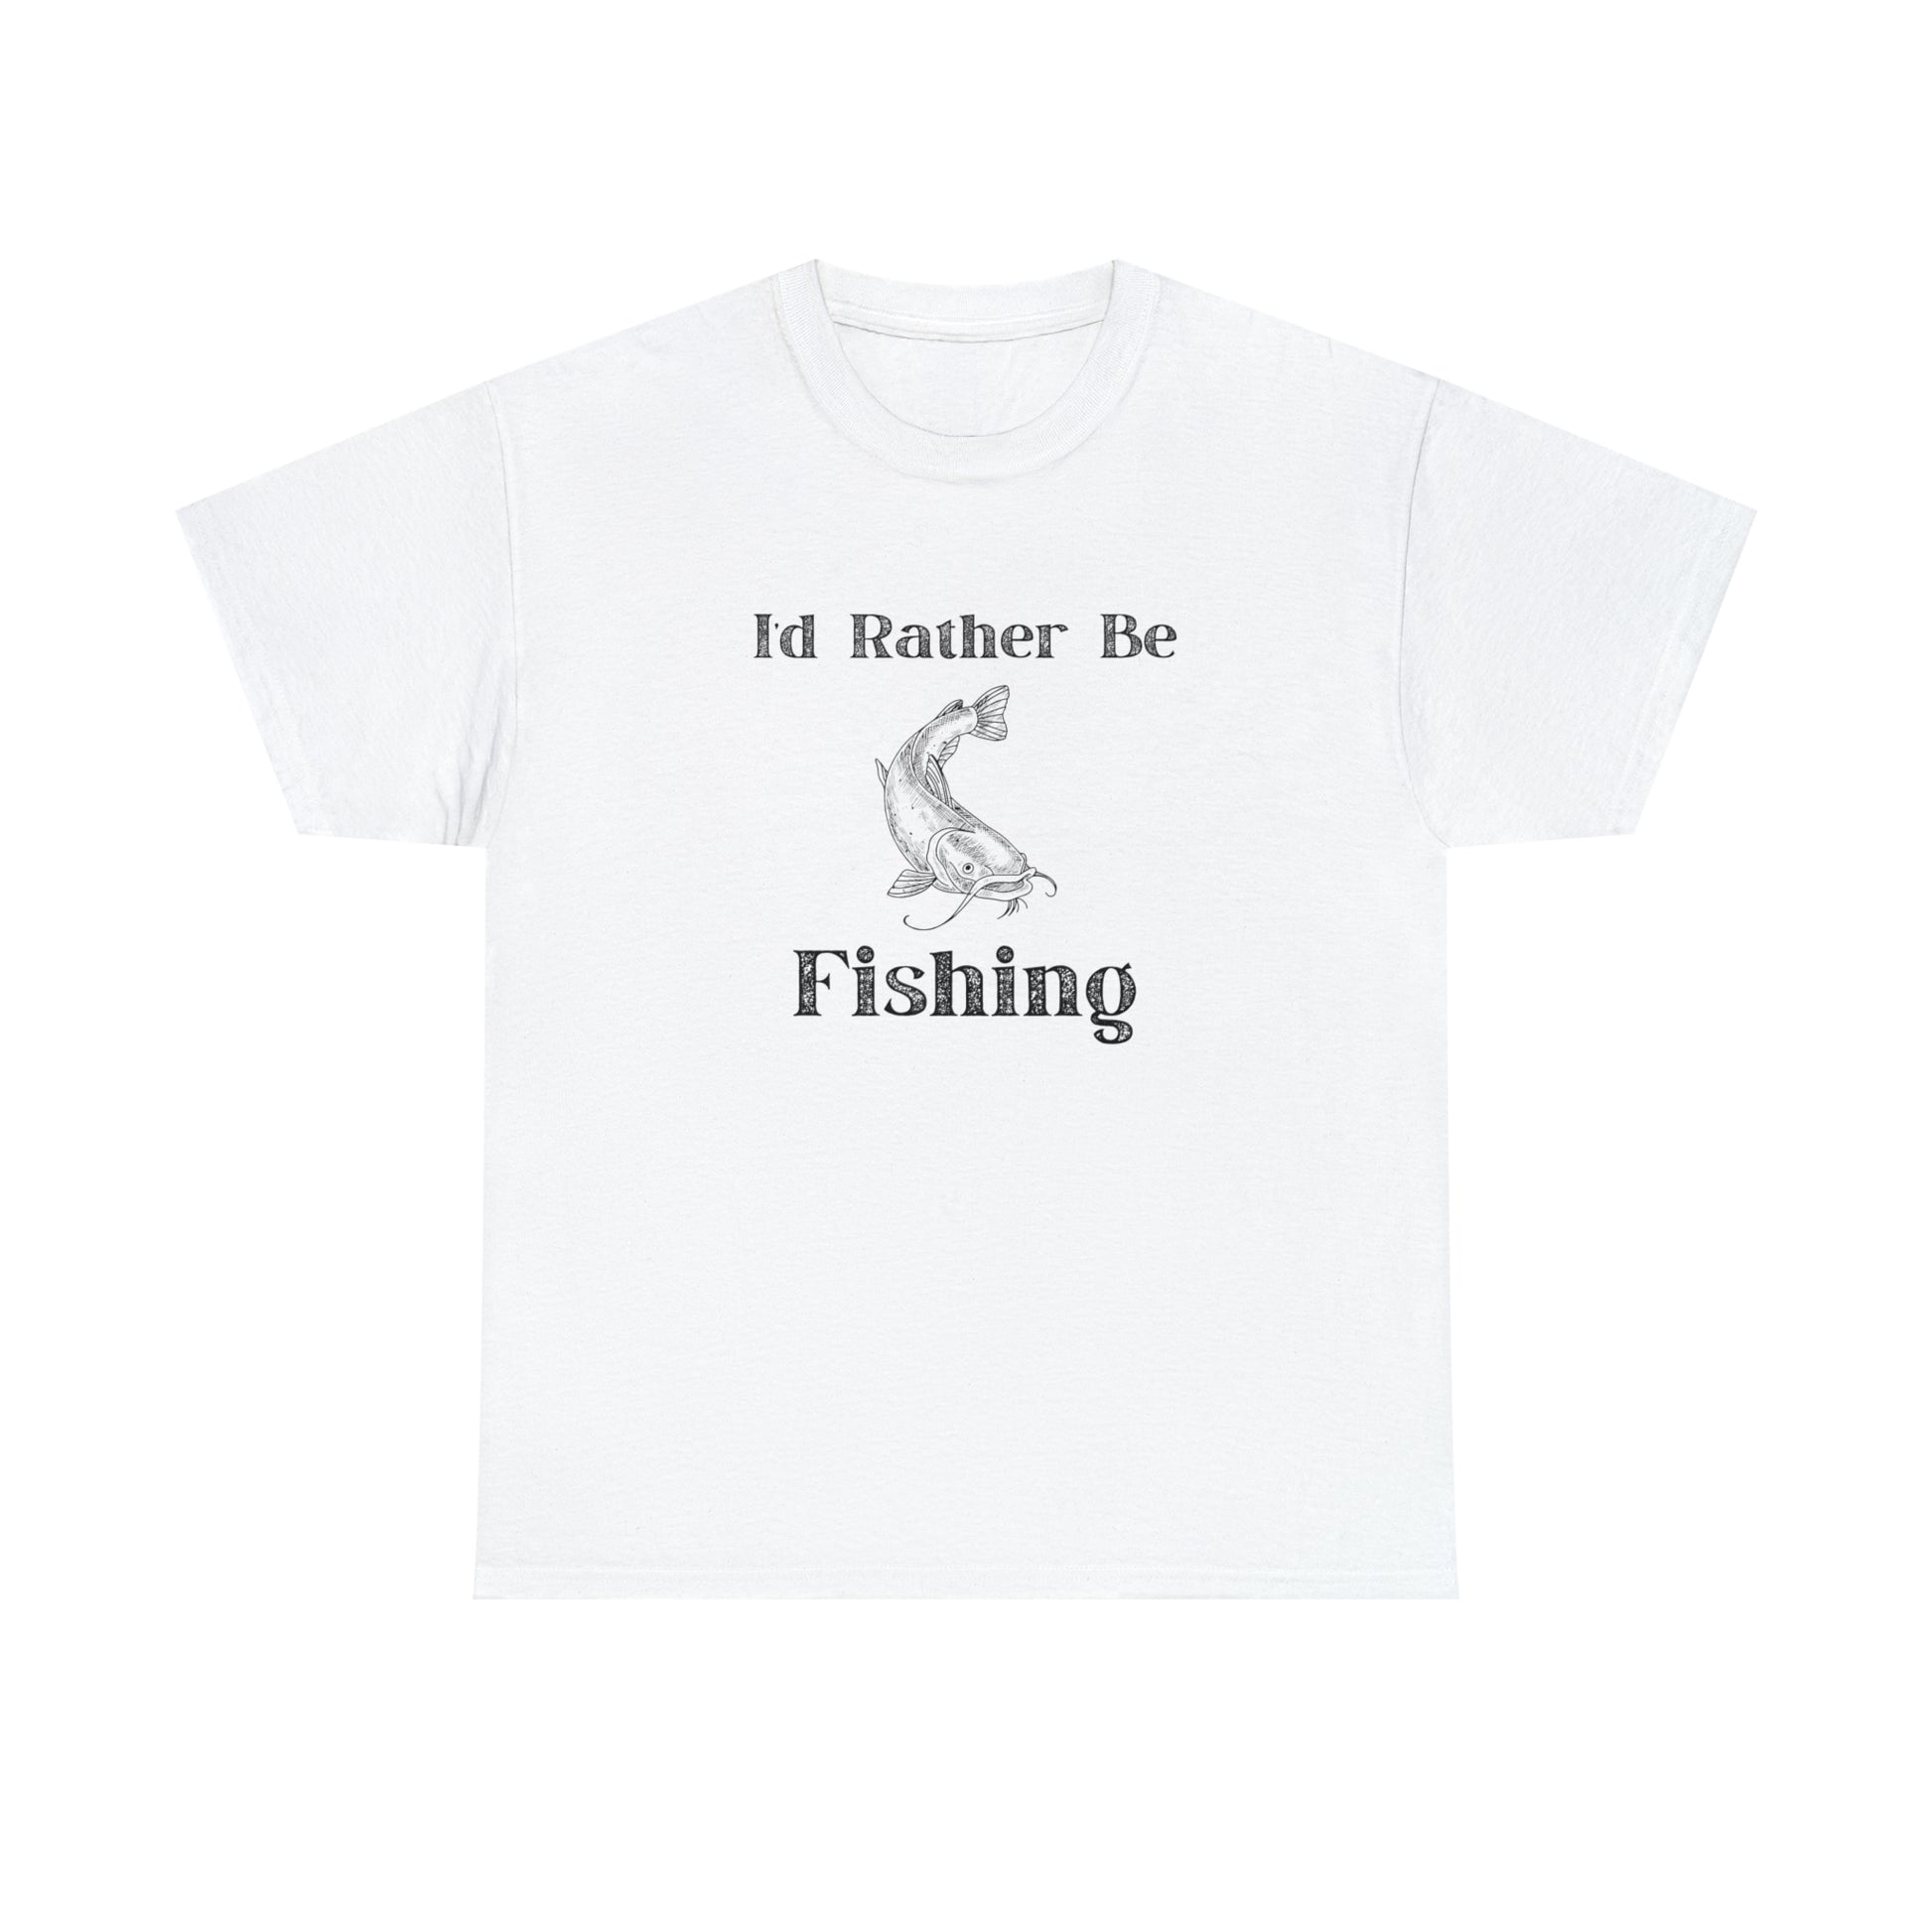 "Id Rather Be Fishing" T-Shirt - Weave Got Gifts - Unique Gifts You Won’t Find Anywhere Else!